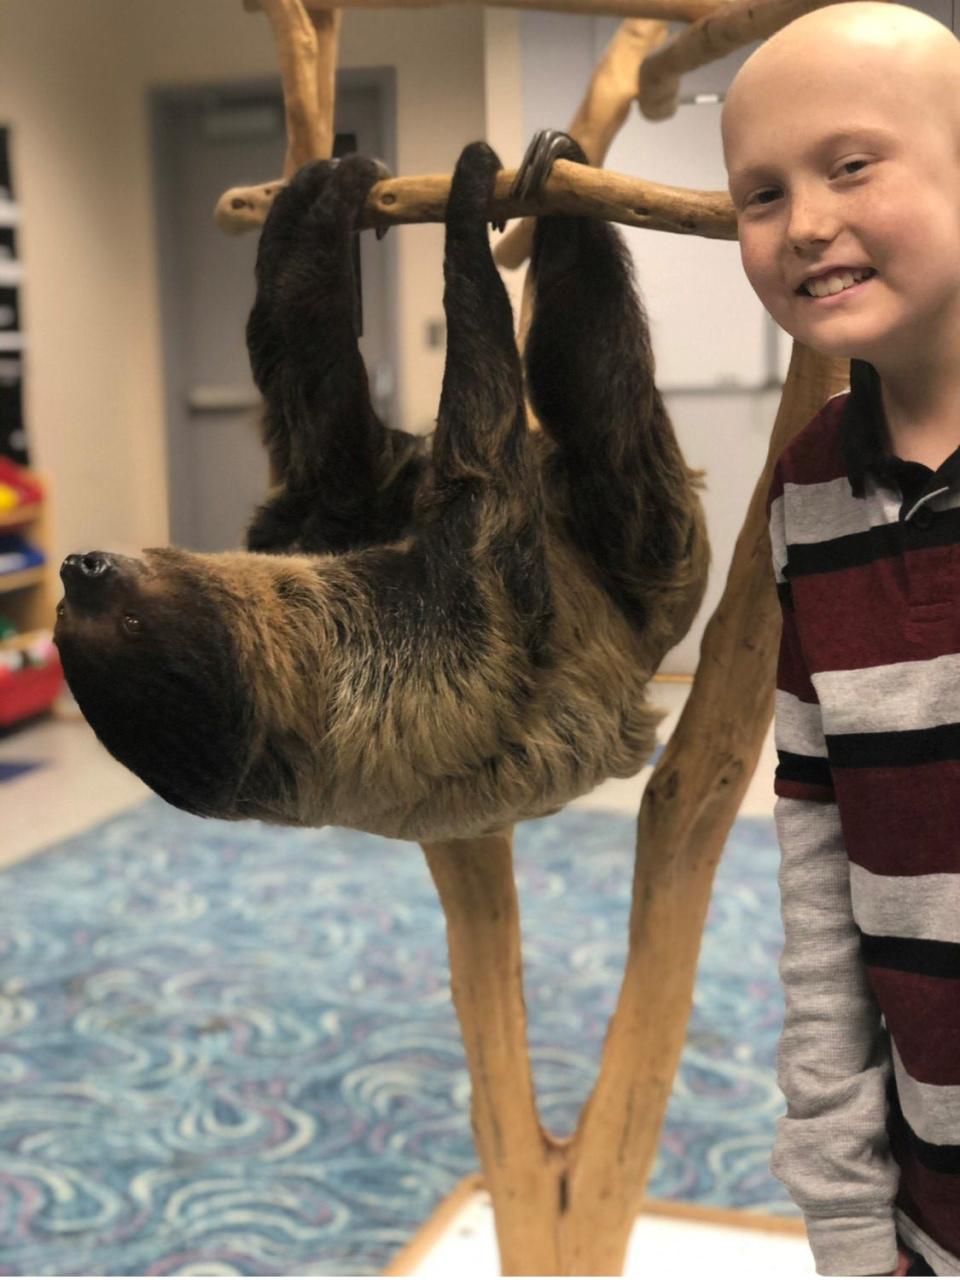 Ben Dixon of Fort Collins meets a sloth, his favorite animal, as part of the Wild Wishes program. Ben died from a rare bone cancer in 2021 at age 11.